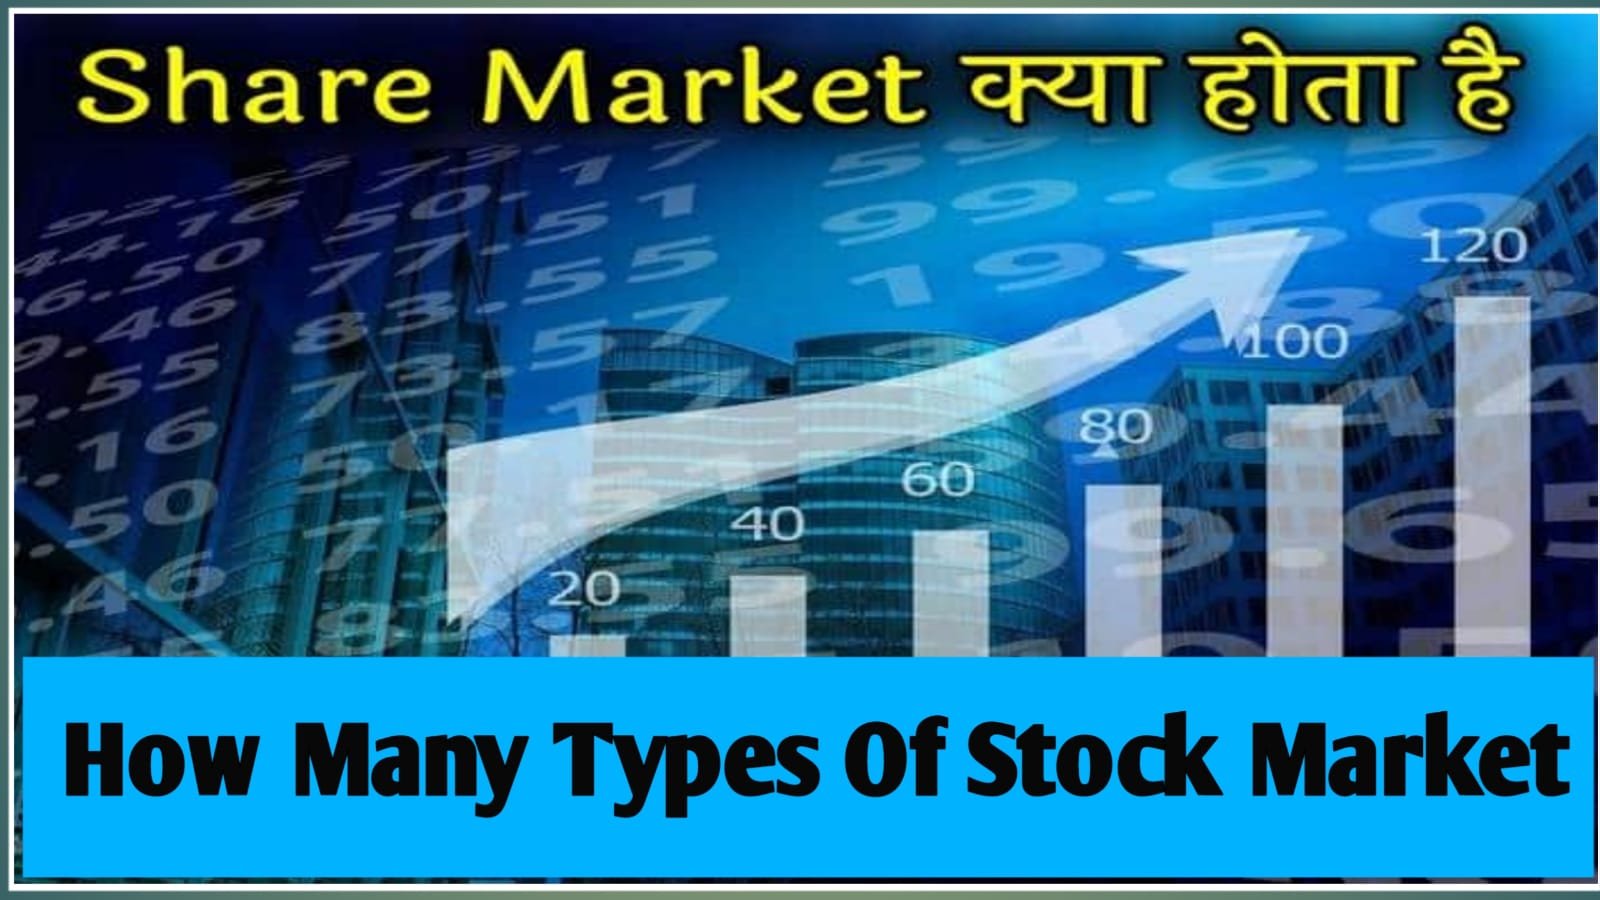 What is stock market and how does it work